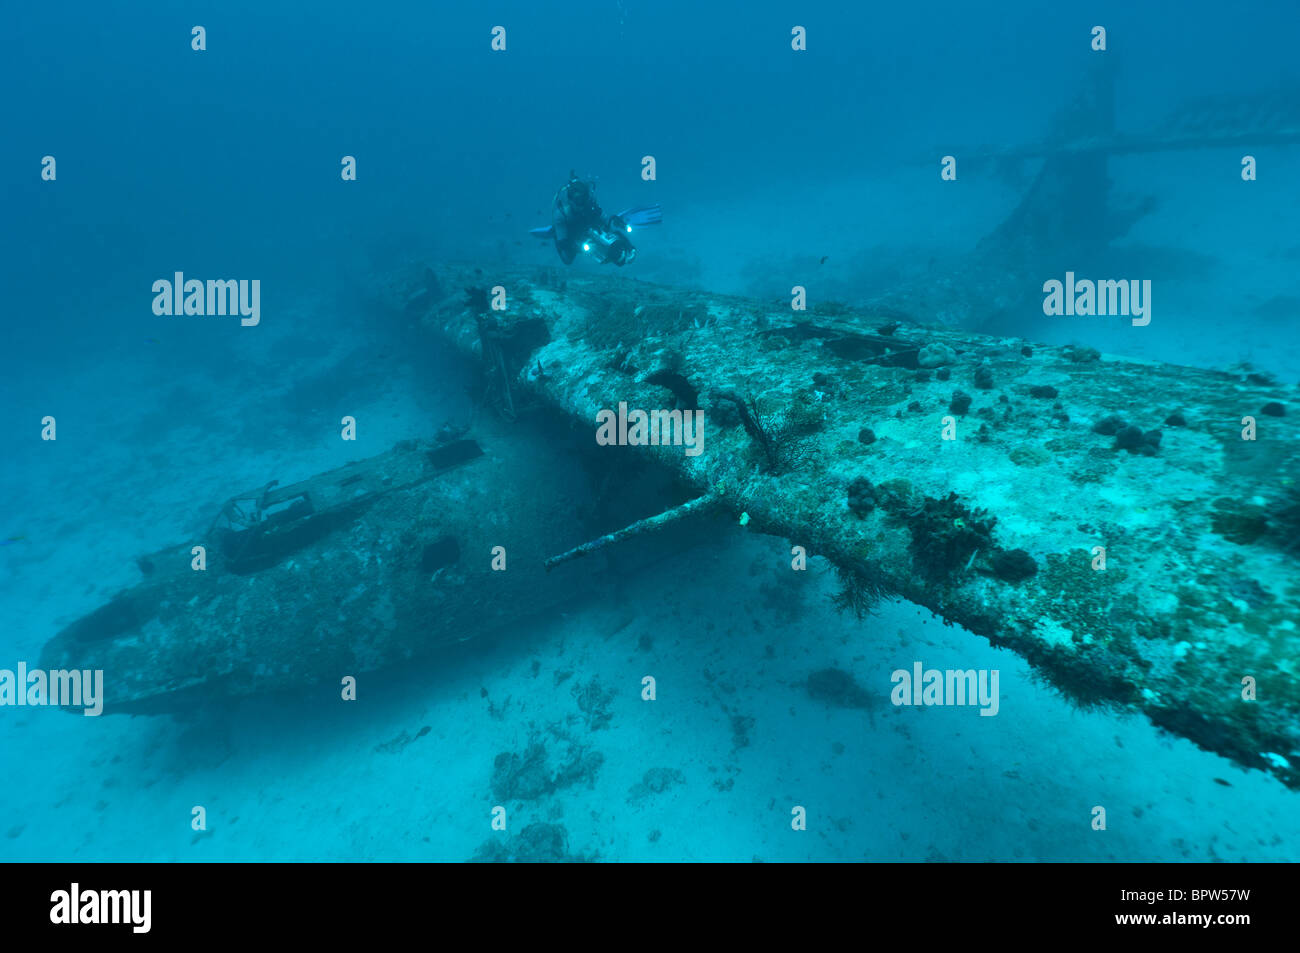 Cameraman filming the wreck of a PBY Catalina seaplane or flying boat underwater, Biak, West Papua, Indonesia. Stock Photo